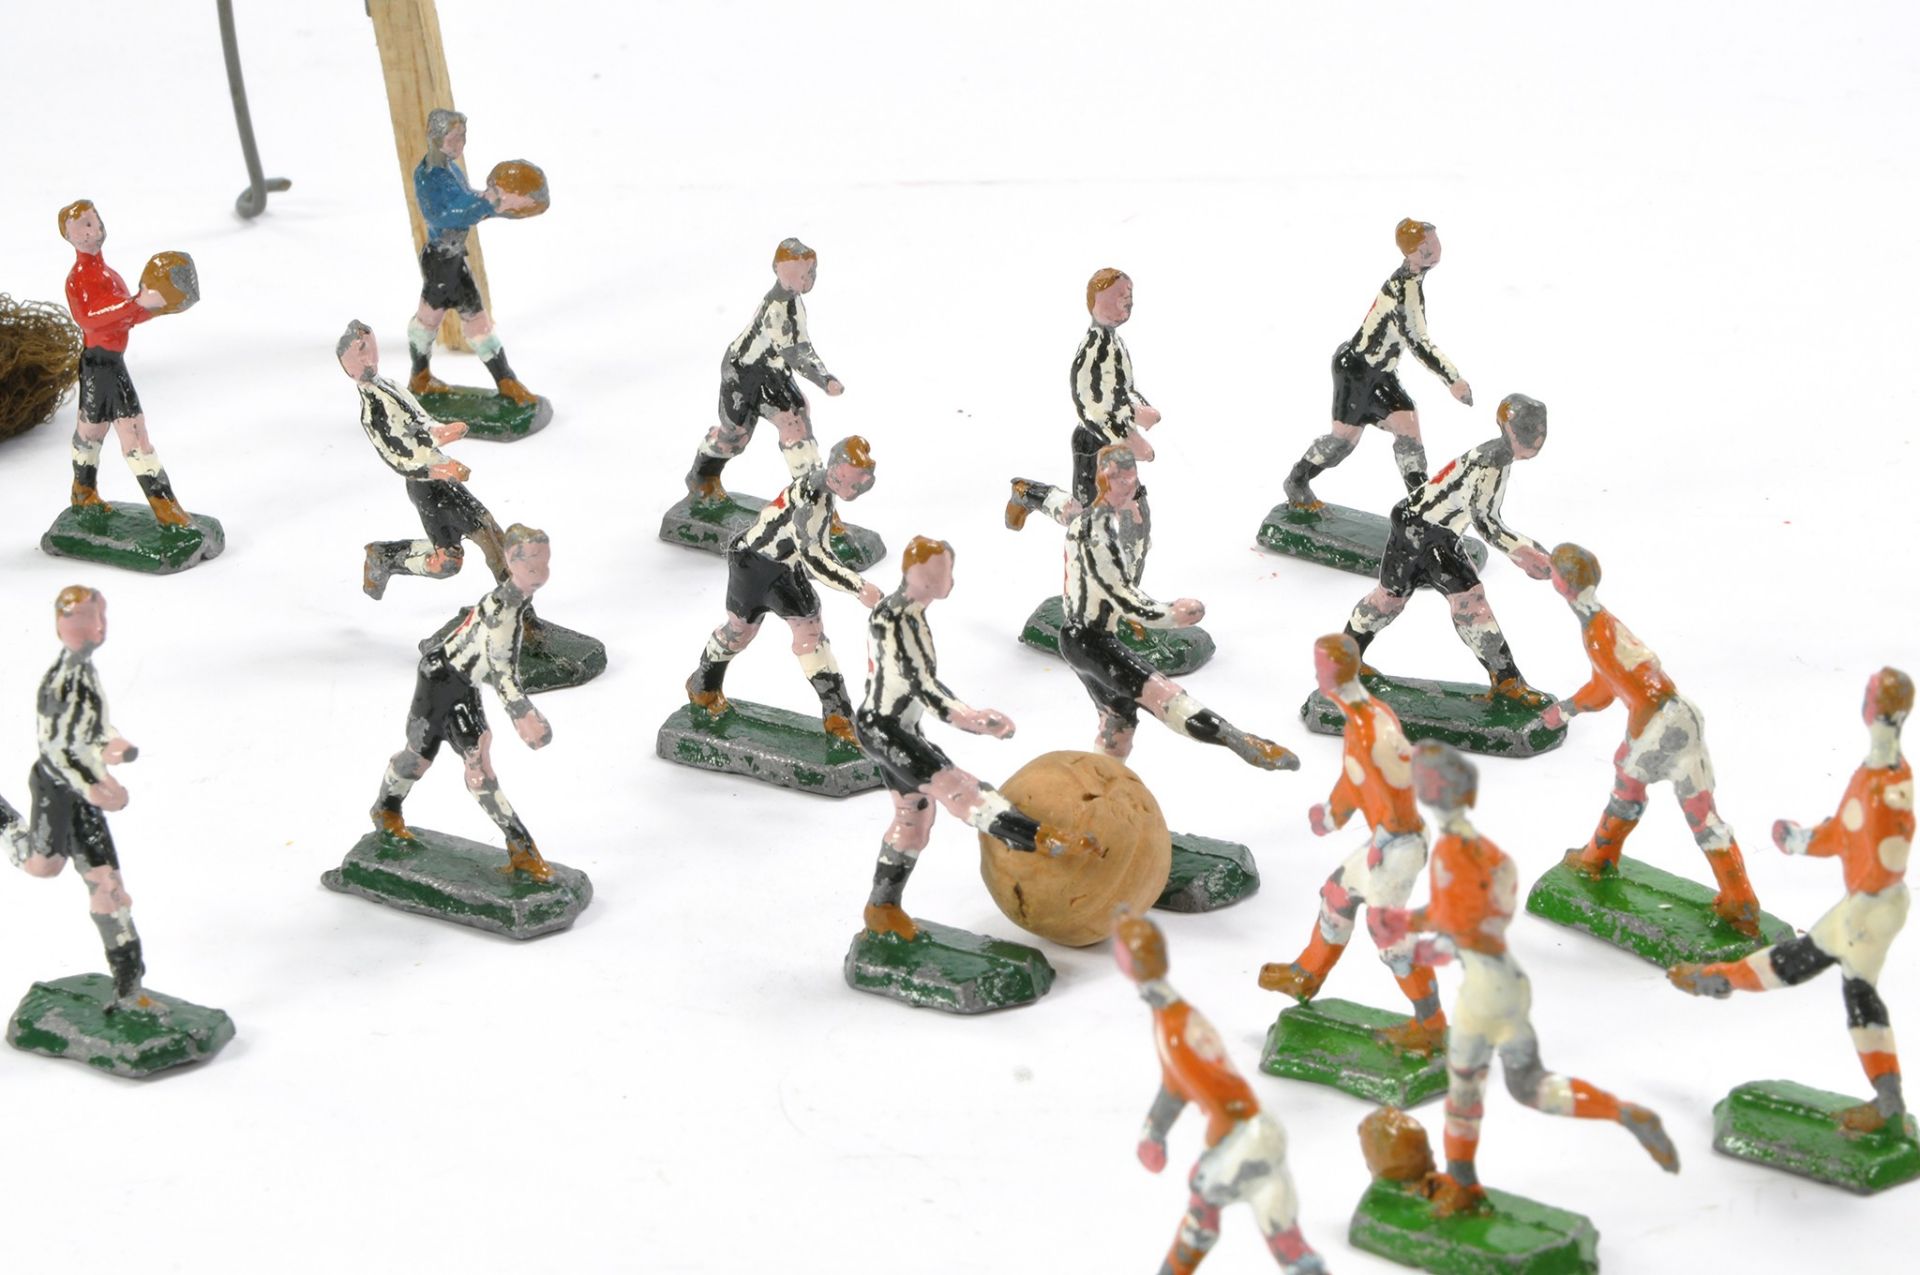 Unusual Lead Metal Football - Soccer Figures likely from a vintage game as shown. Maker unknown. - Image 3 of 3